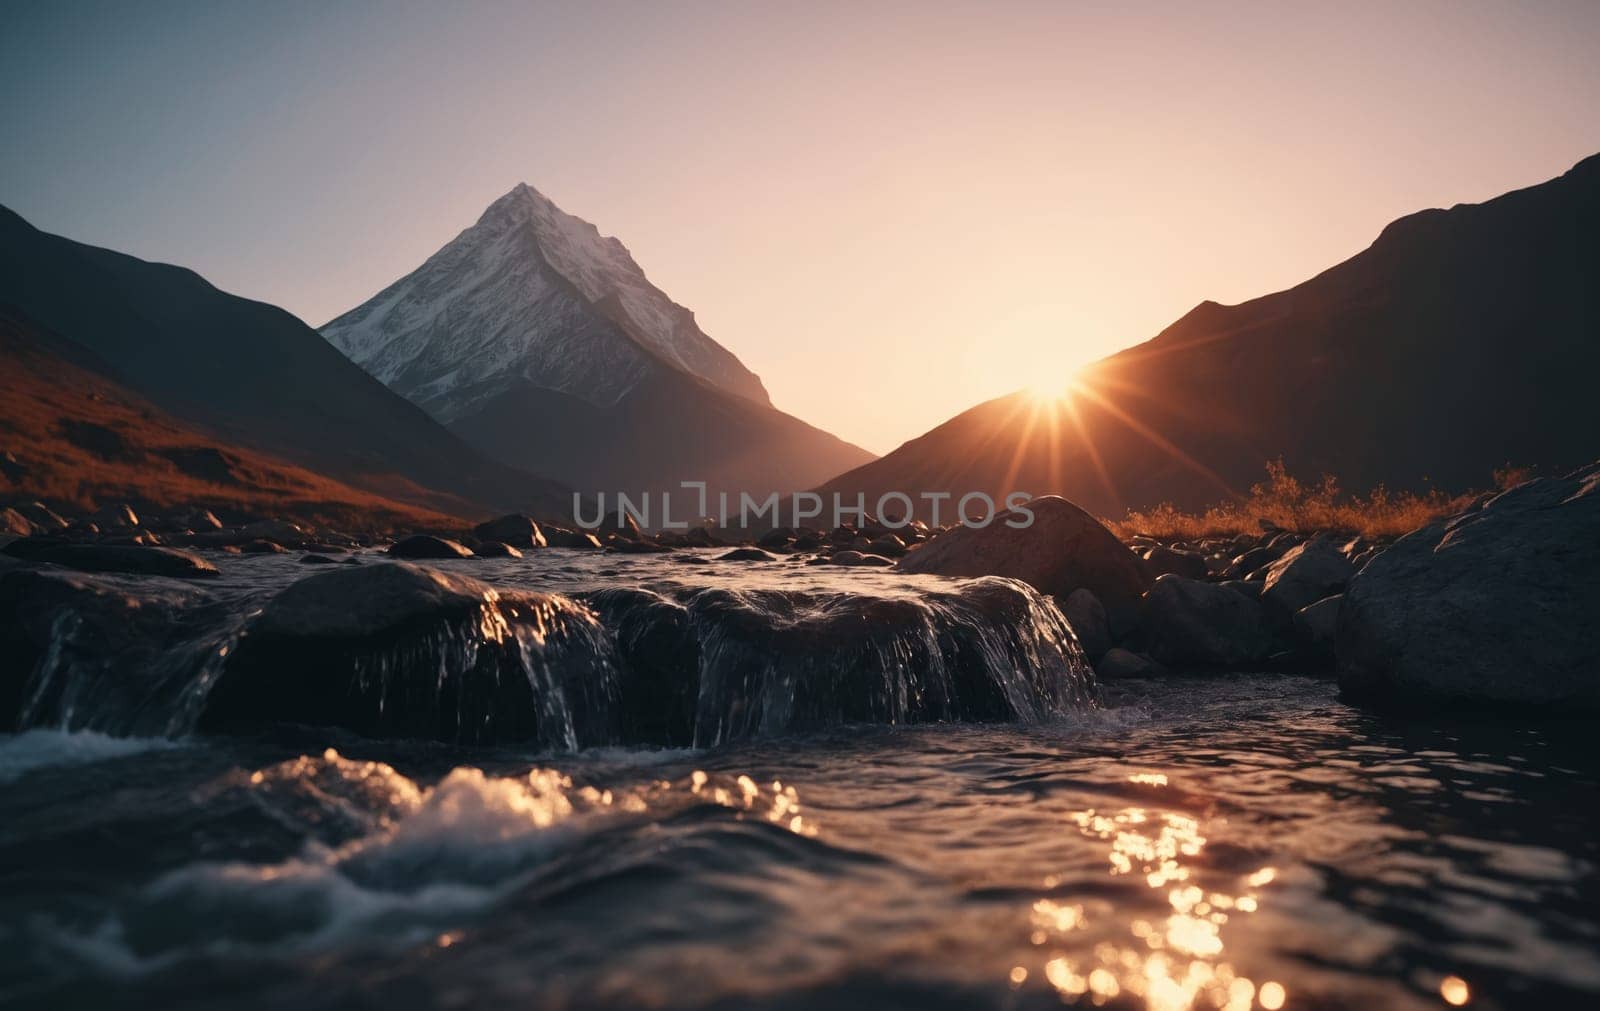 Mountain river at sunset, mountain peak in the background by Andre1ns